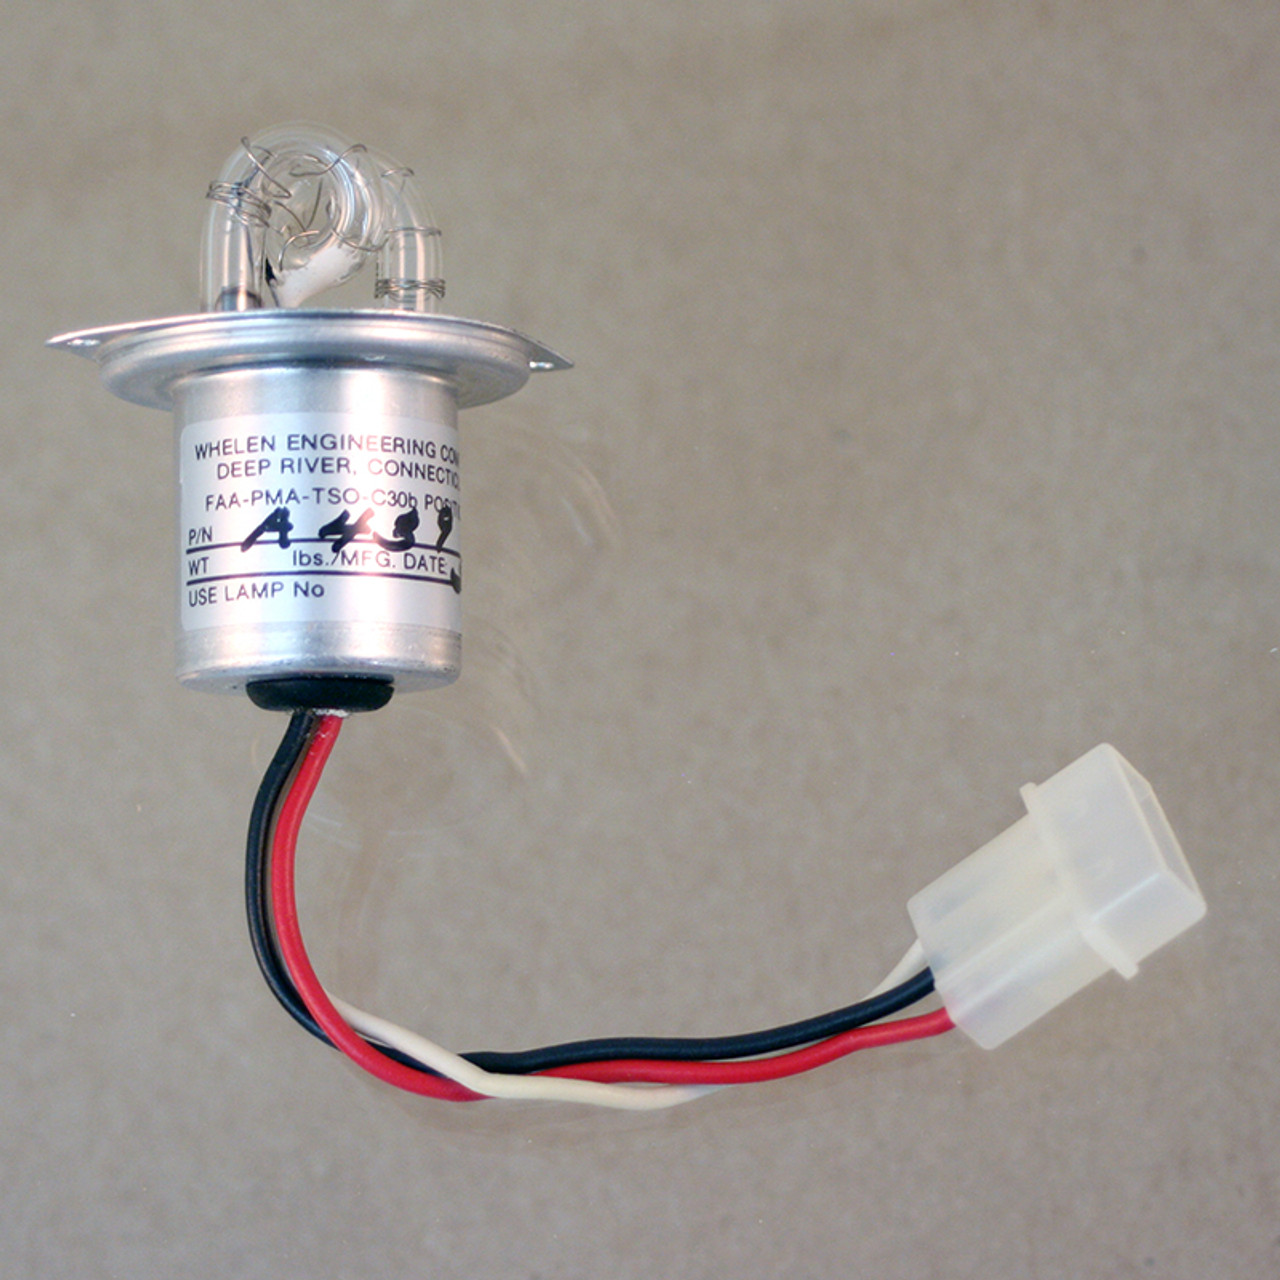 A435   WHELEN FLASH TUBE ASSEMBLY